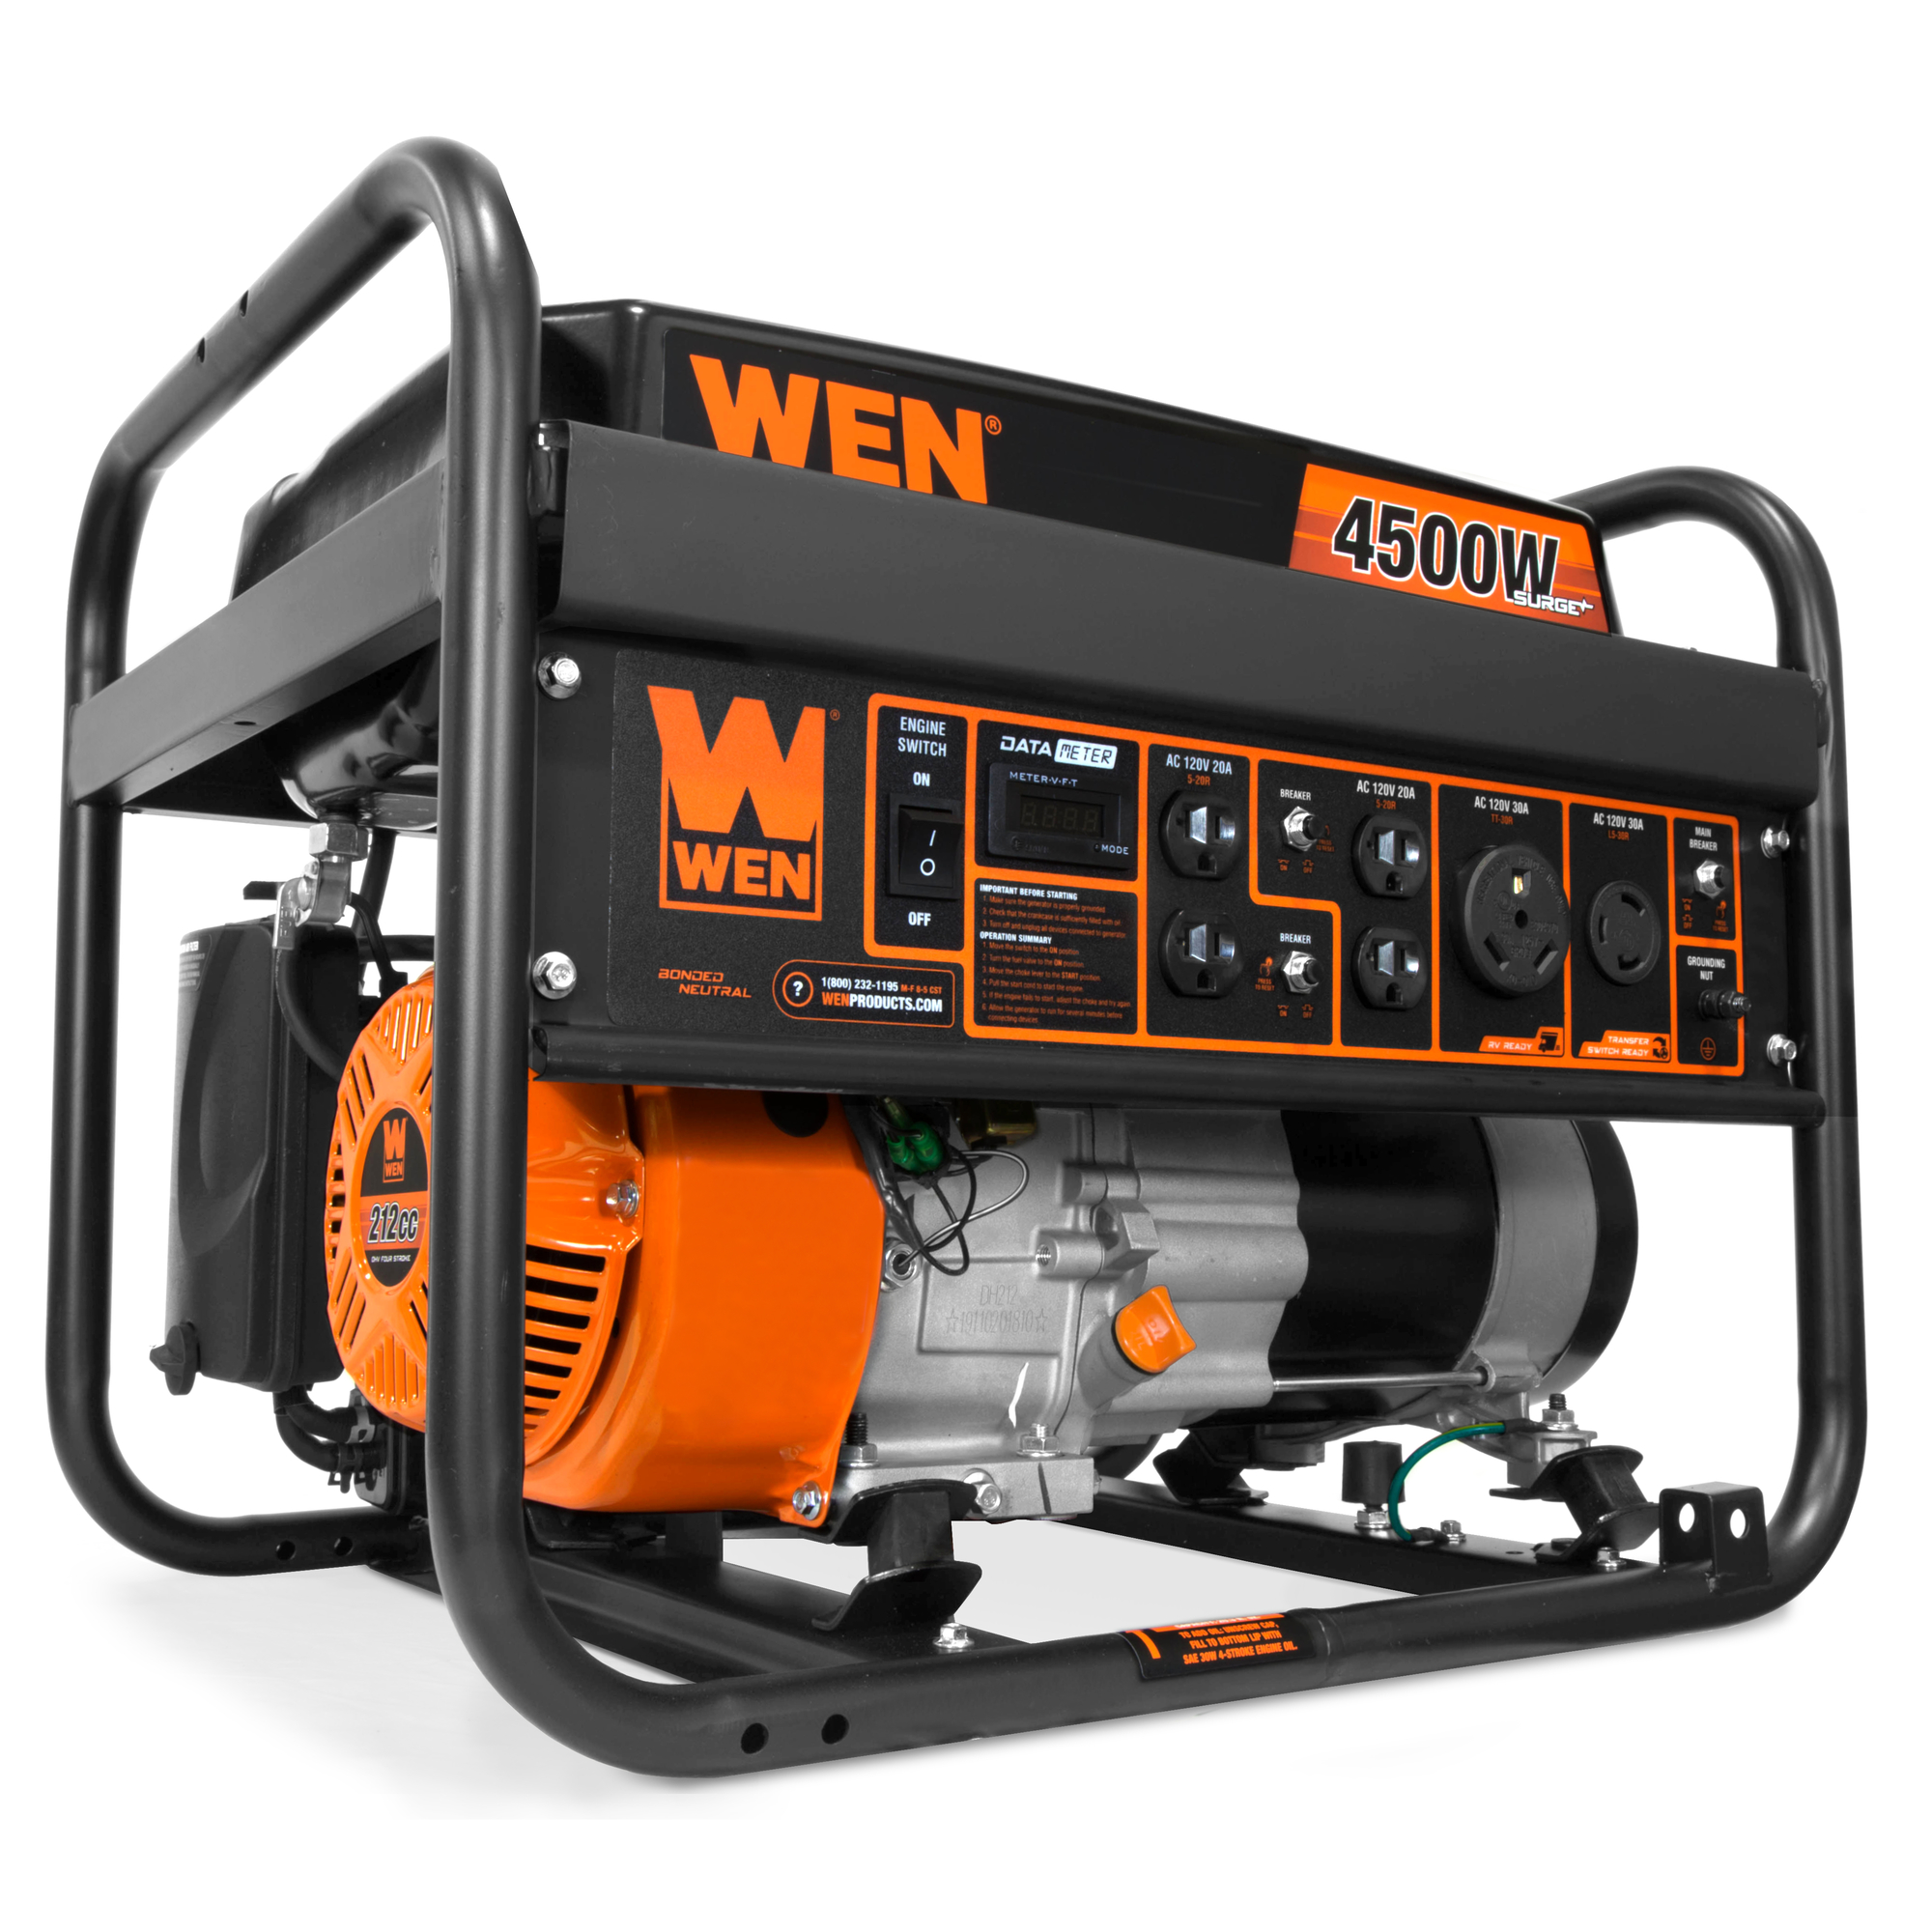 WEN, 4500W Portable Generator, Surge Watts 4500 Rated Watts 3600 Voltage 120 Model GN4500